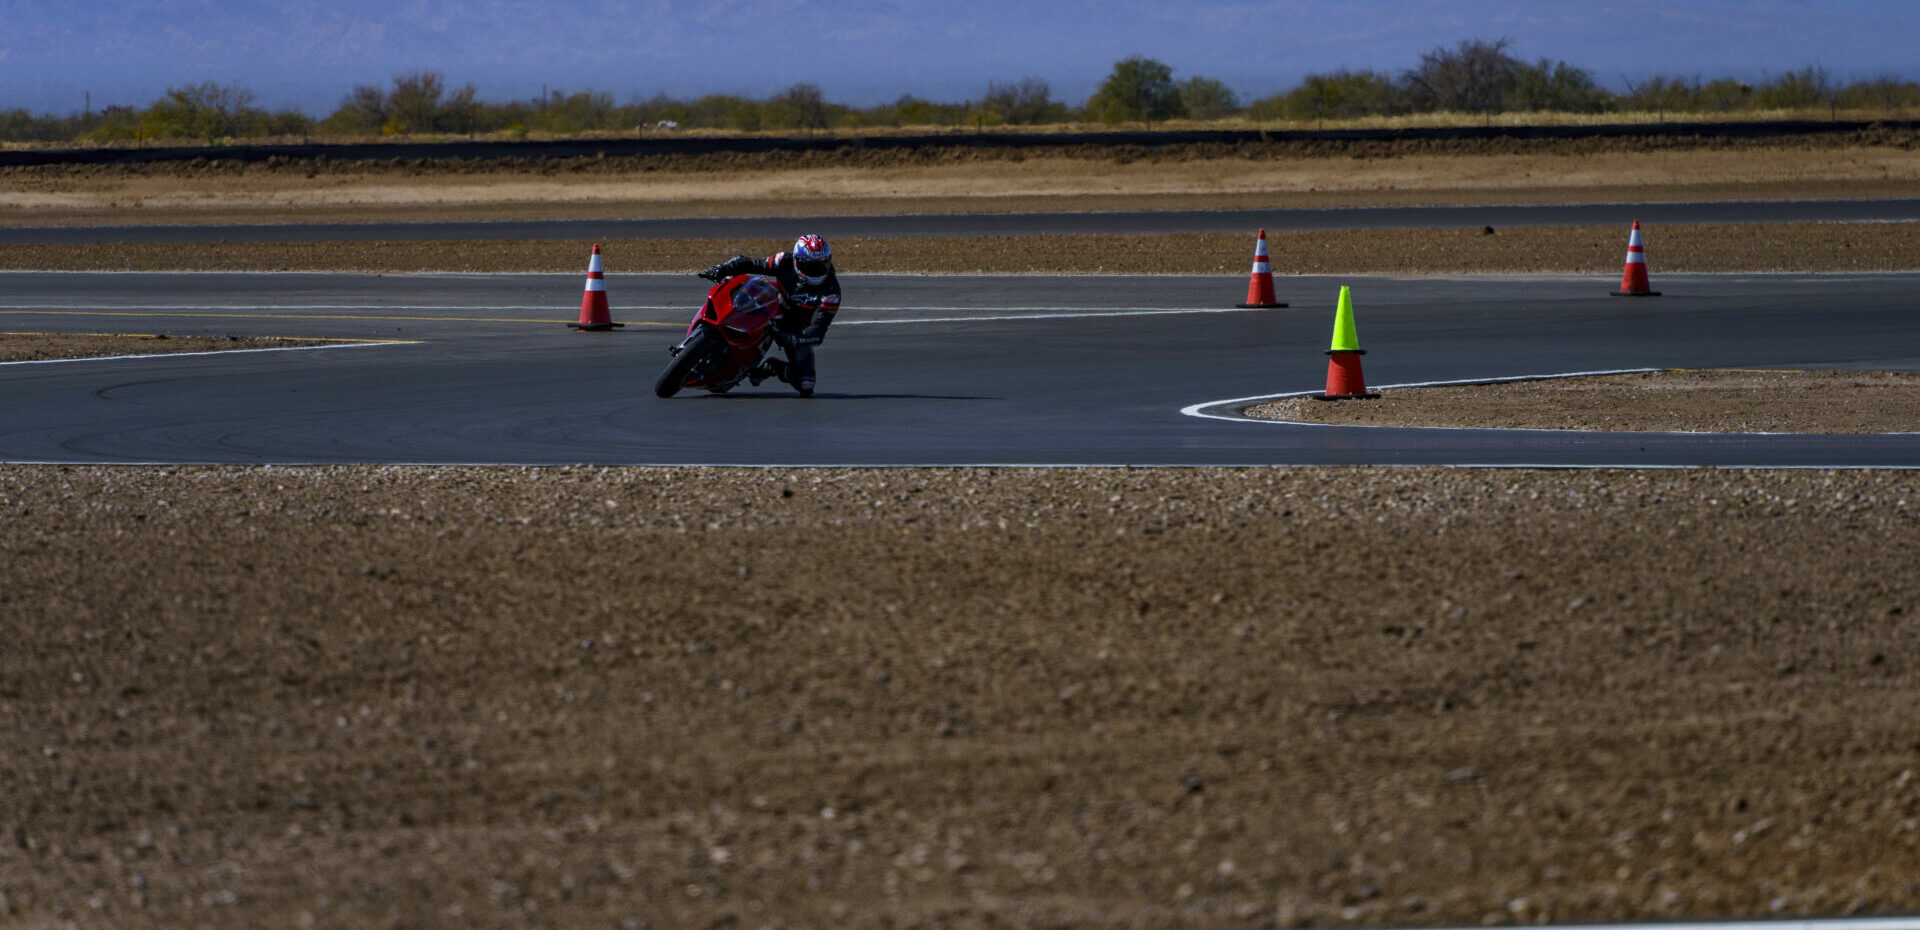 A motorcyclist on course at new The Podium Club road course in Arizona. Photo courtesy The Podium Club.